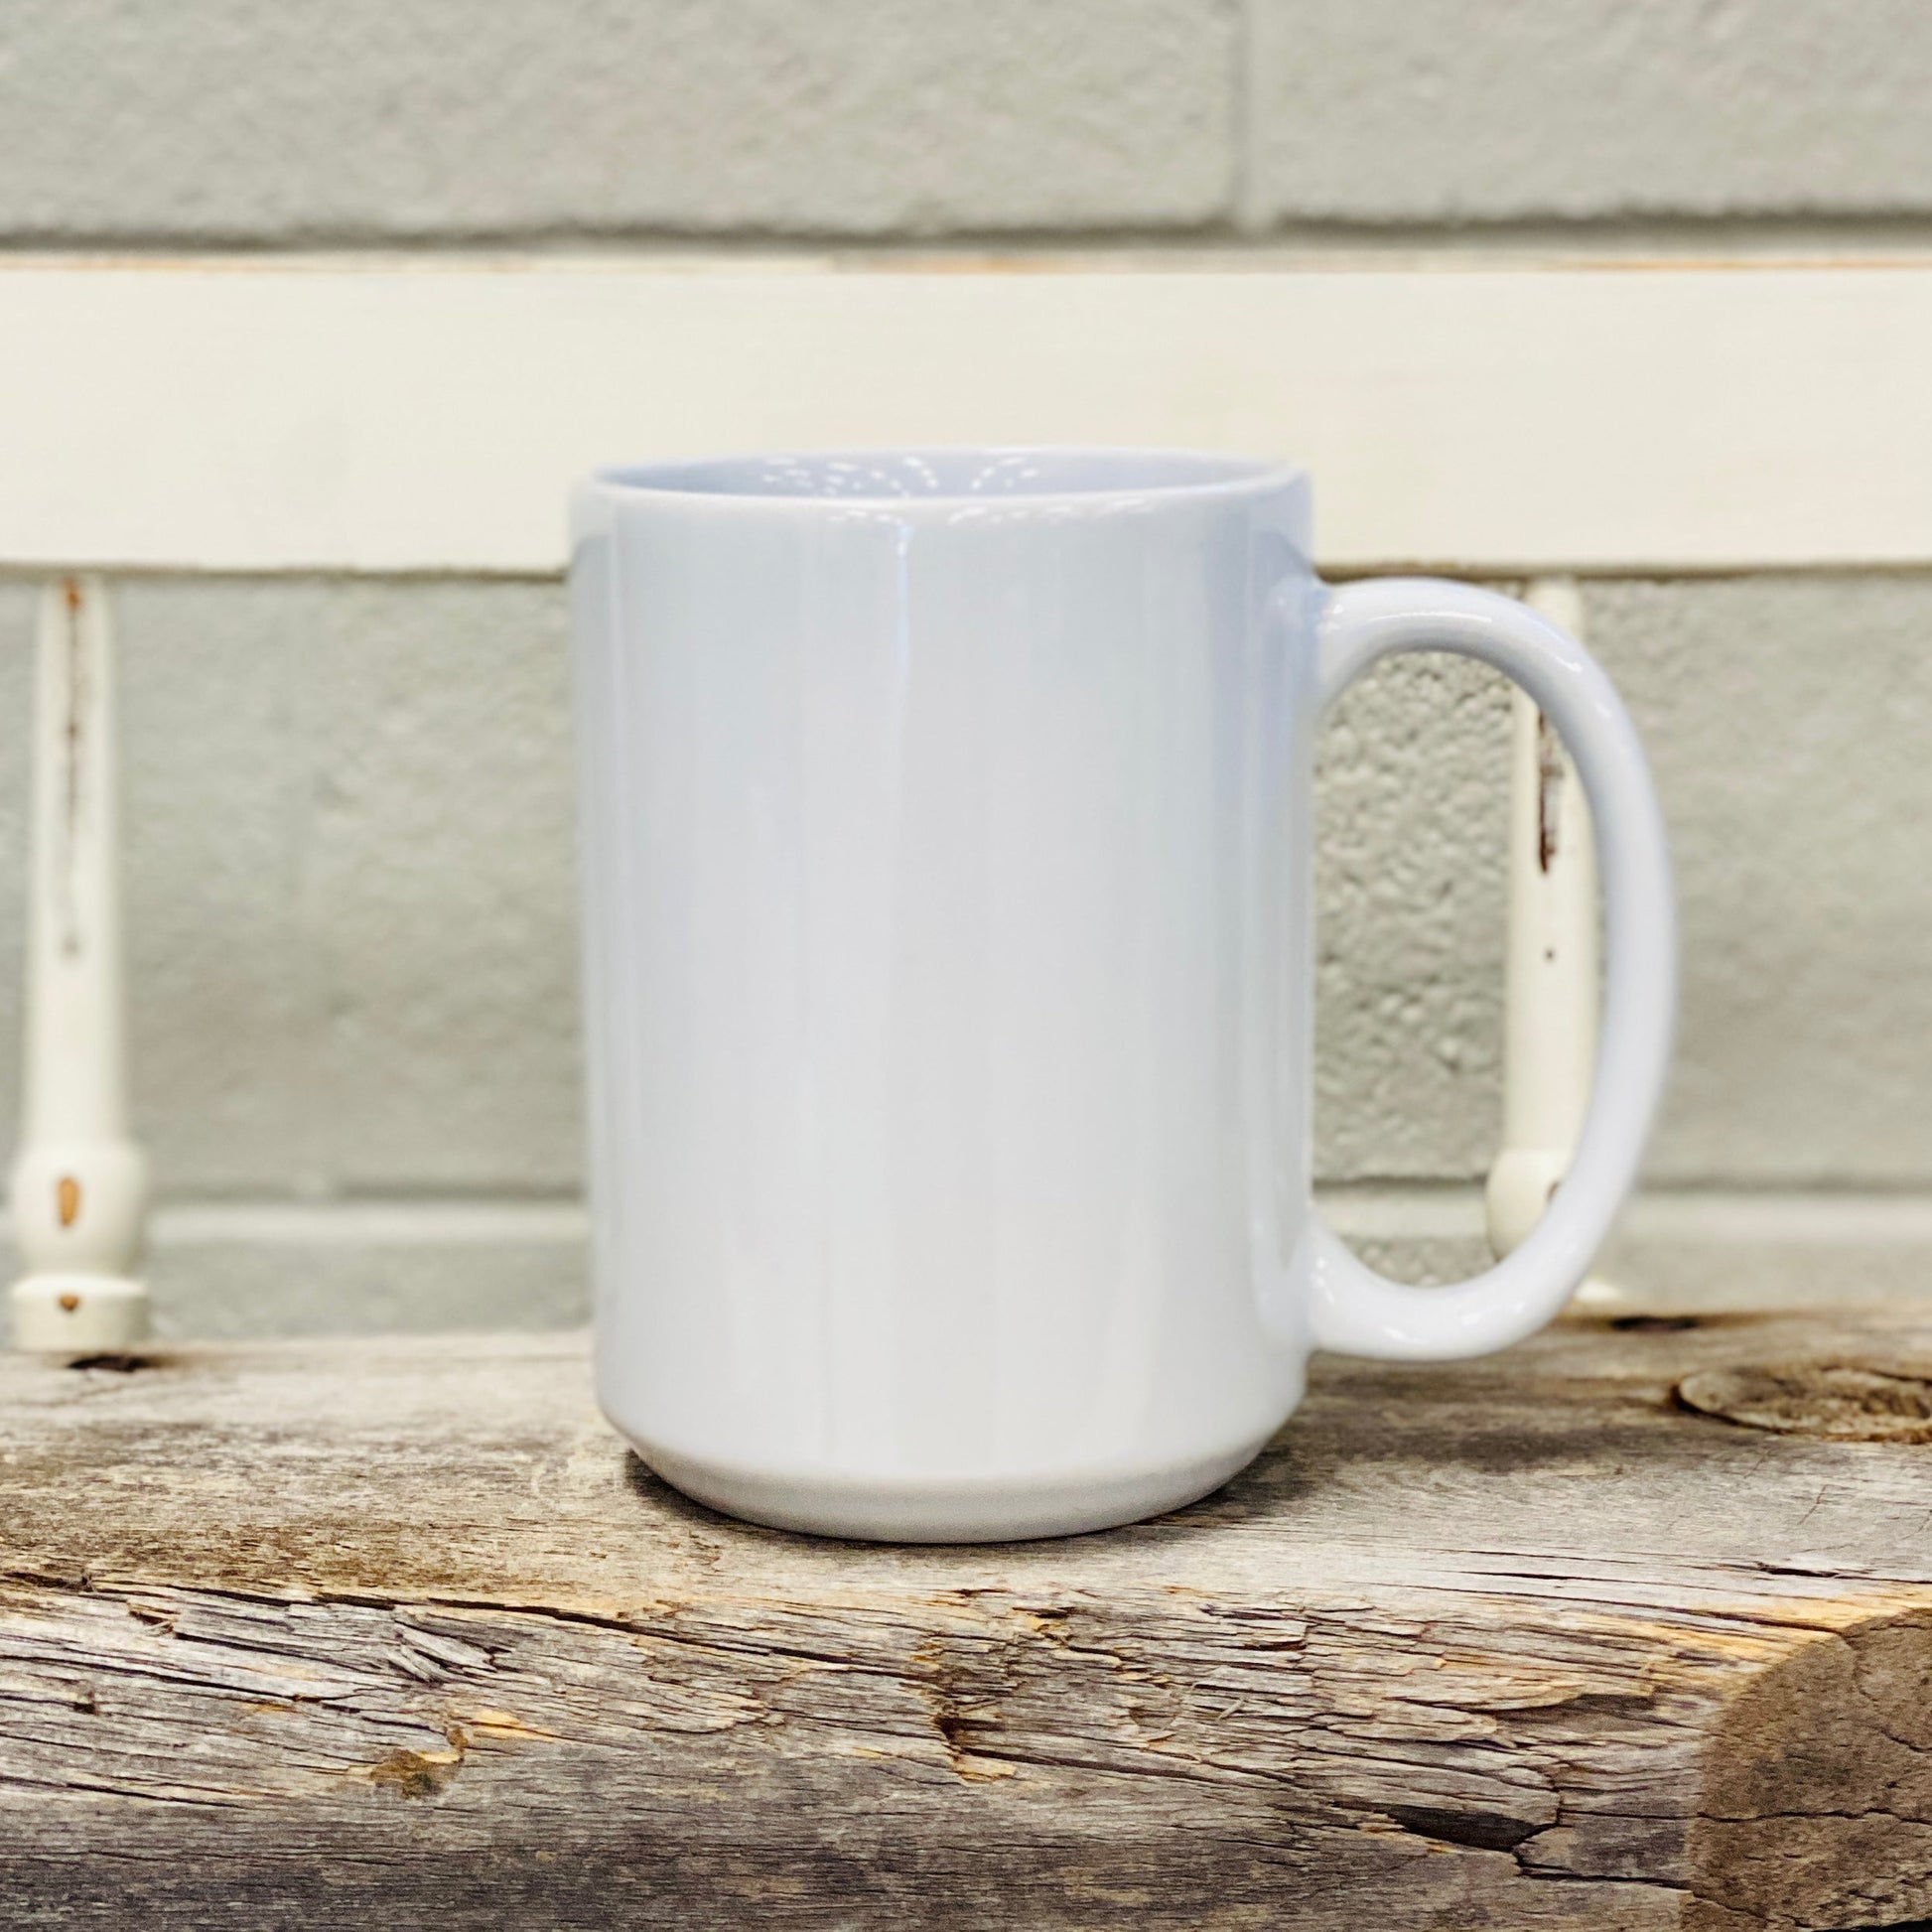 15oz Ceramic White Mug, White. Perfect product to use as personalized gifts for coffee lovers, or souvenirs for tourists.